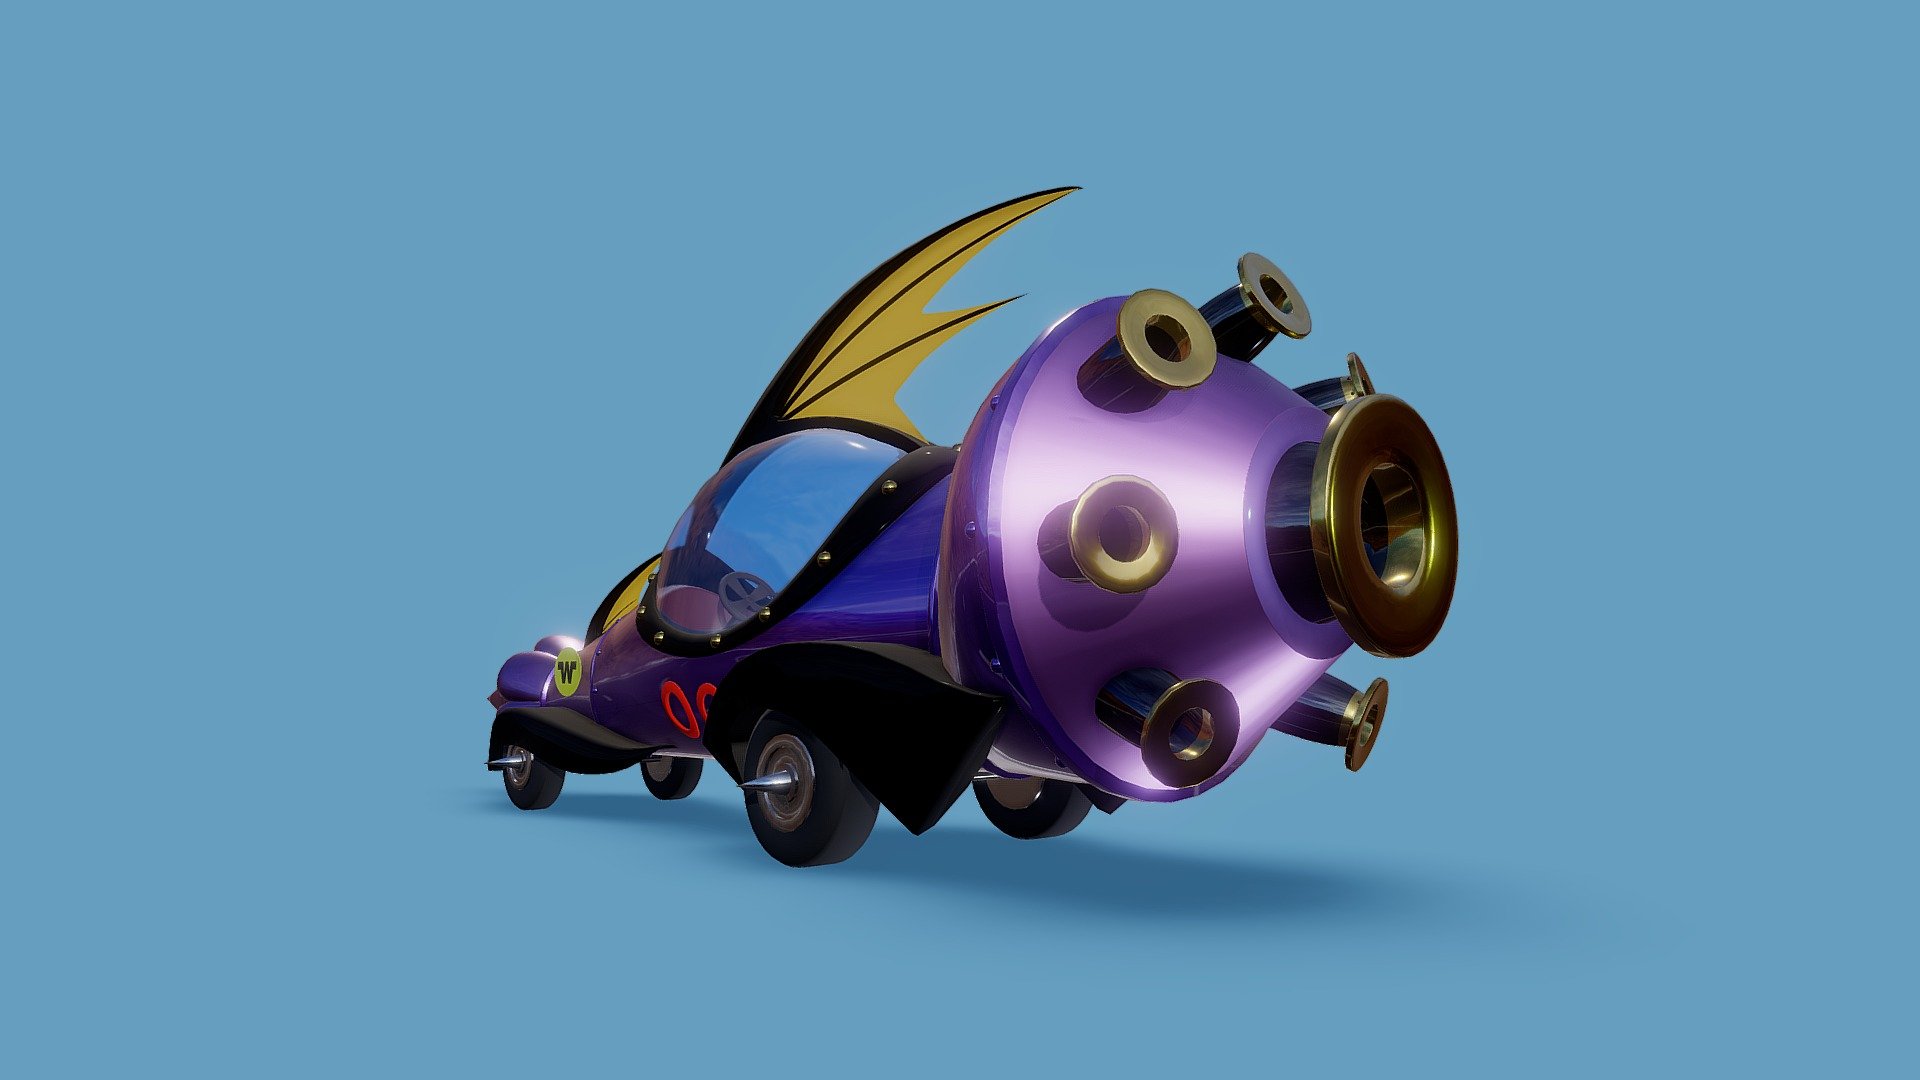 00 - The Mean Machine - Wacky Races Vehicle - The Mean Machine - Wacky Races - 3D model by Vangre 3d model